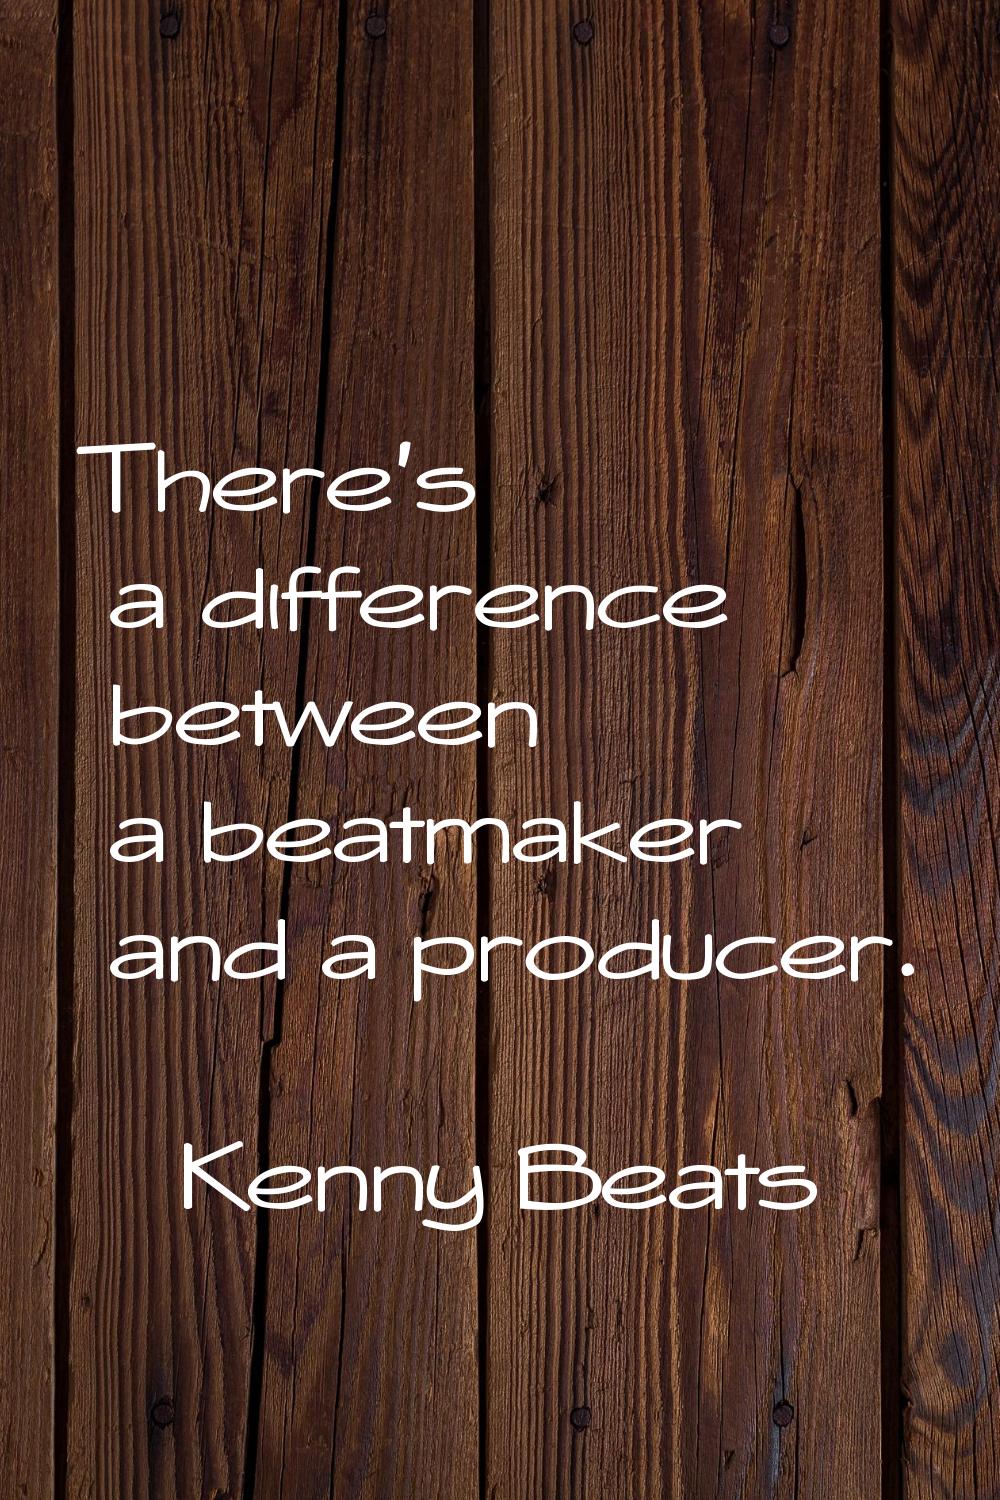 There's a difference between a beatmaker and a producer.